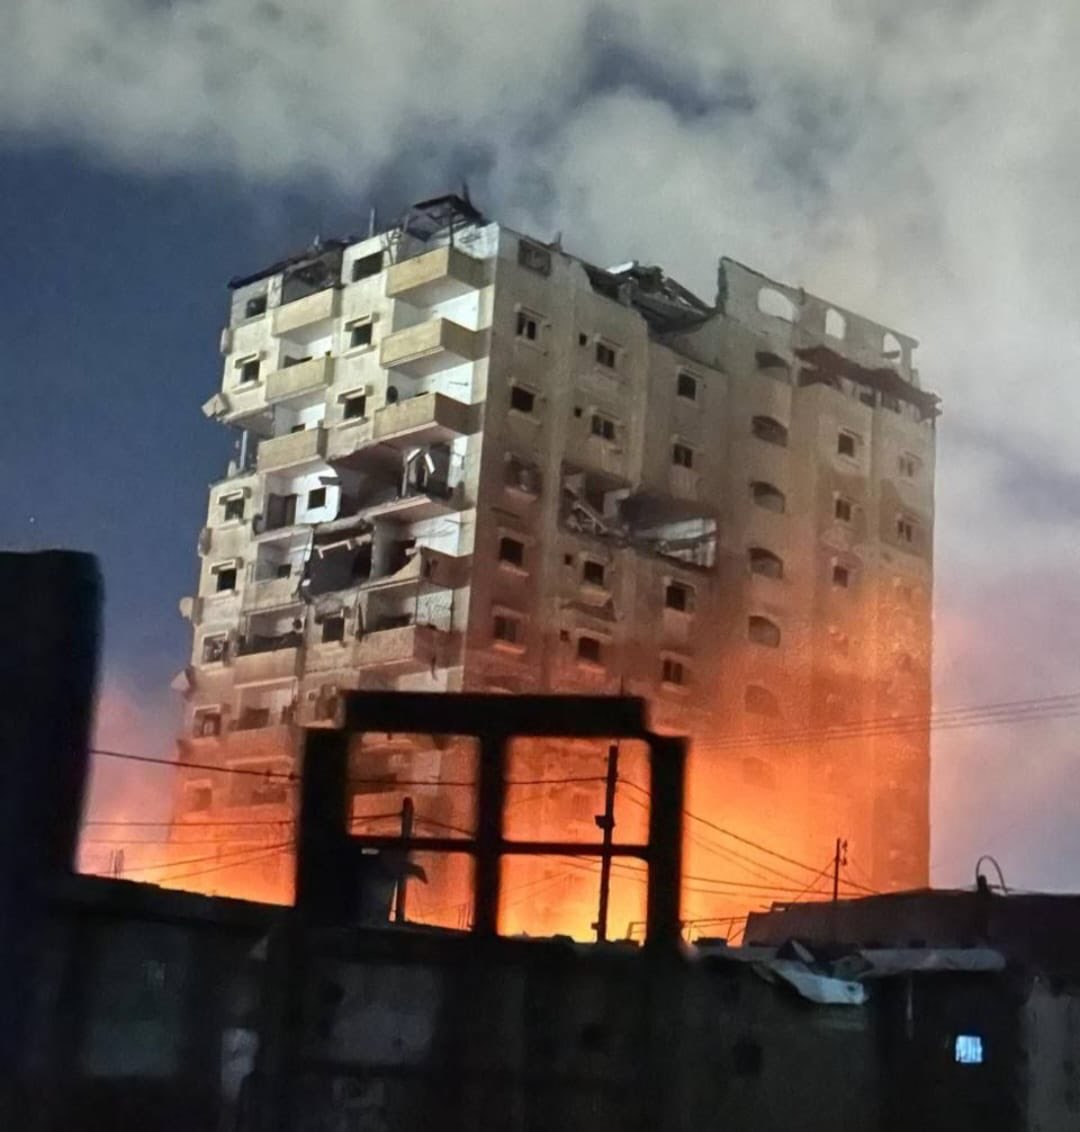 Rafah: The Israeli army attacked the largest residential building in the city tonight, and as a result a wing of the building was destroyed